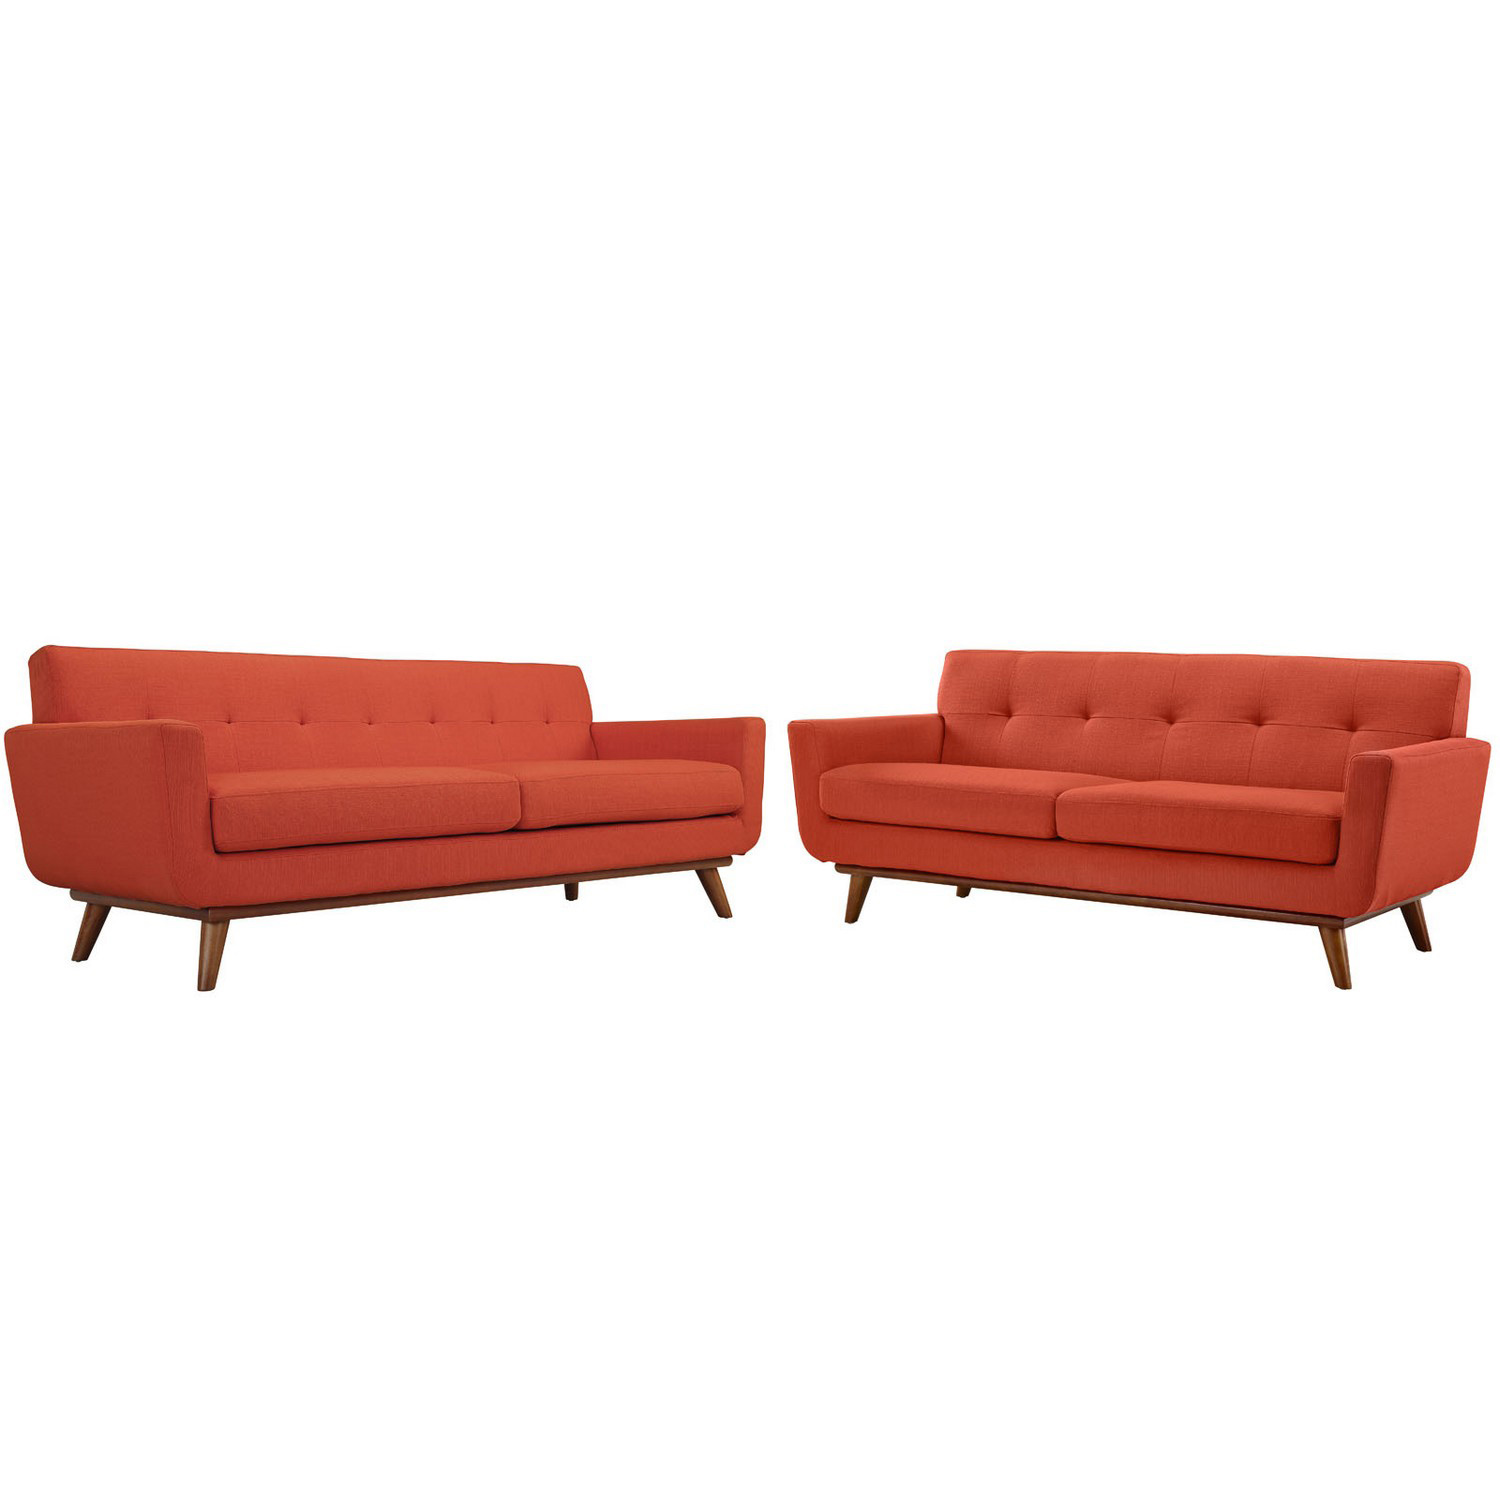 Modway Engage Loveseat and Sofa Set of 2 - Atomic Red